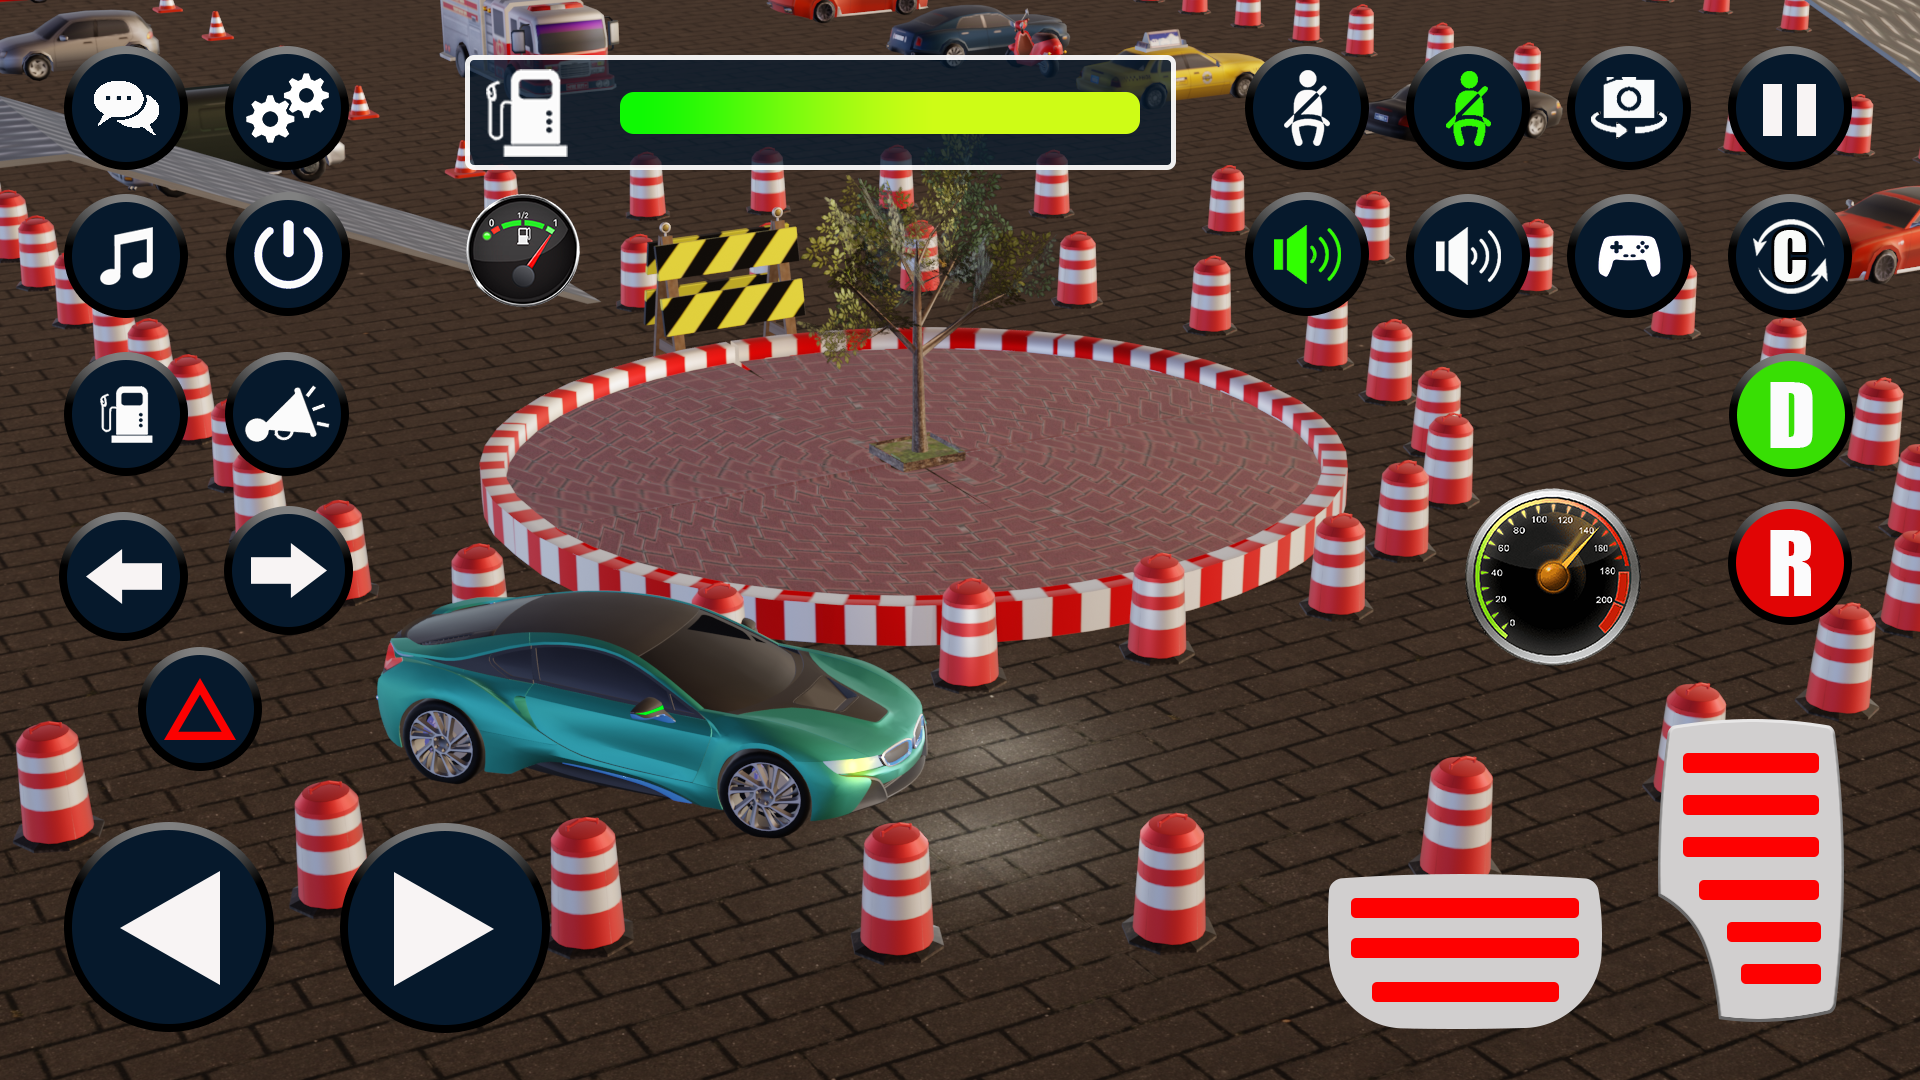 Sports Car Driving School Simulator  Unity3D : Android, iOS Android Games  